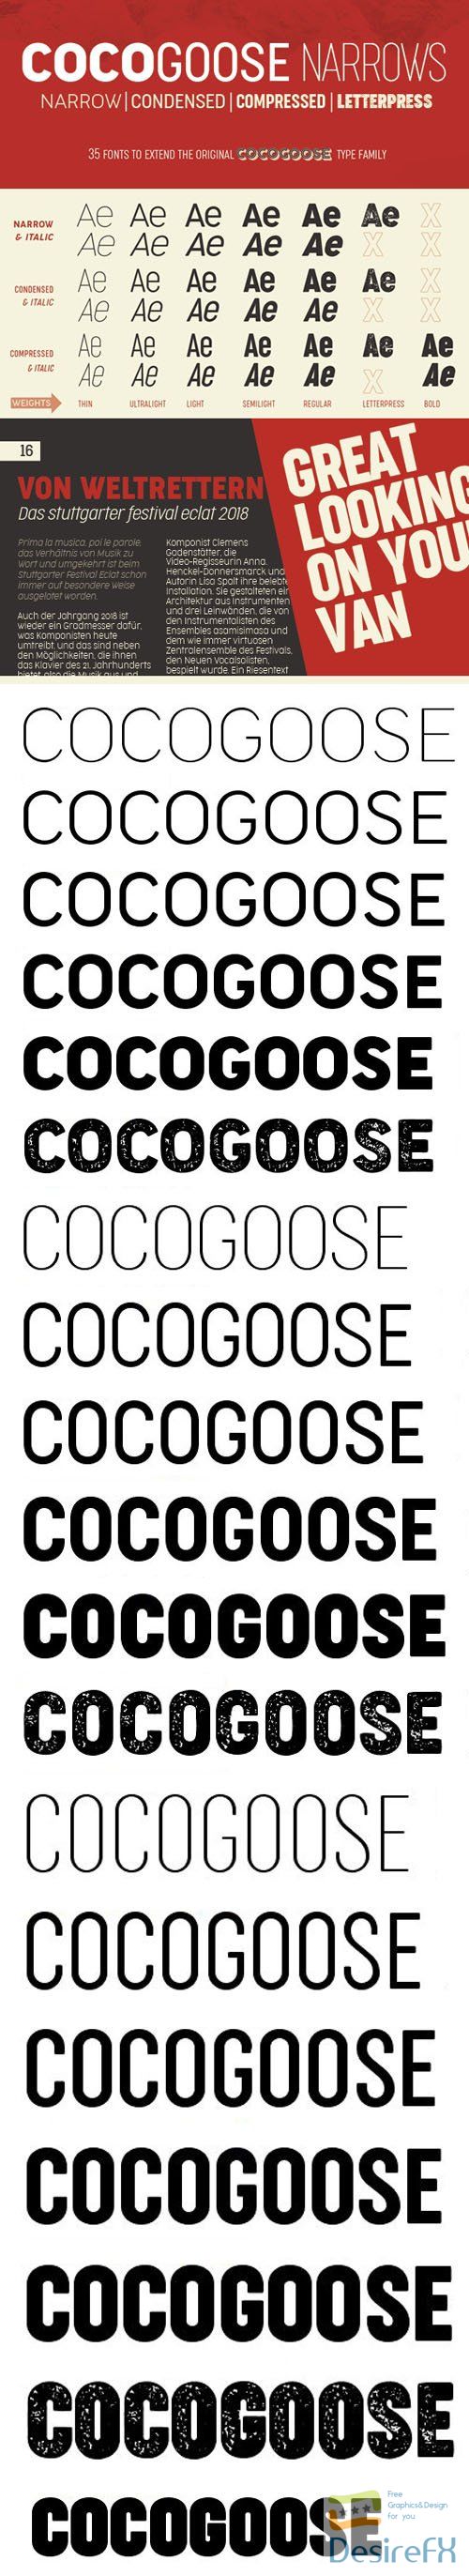 Cocogoose Narrows Font Family - Condensed, Compressed and Narrow 19-Weights